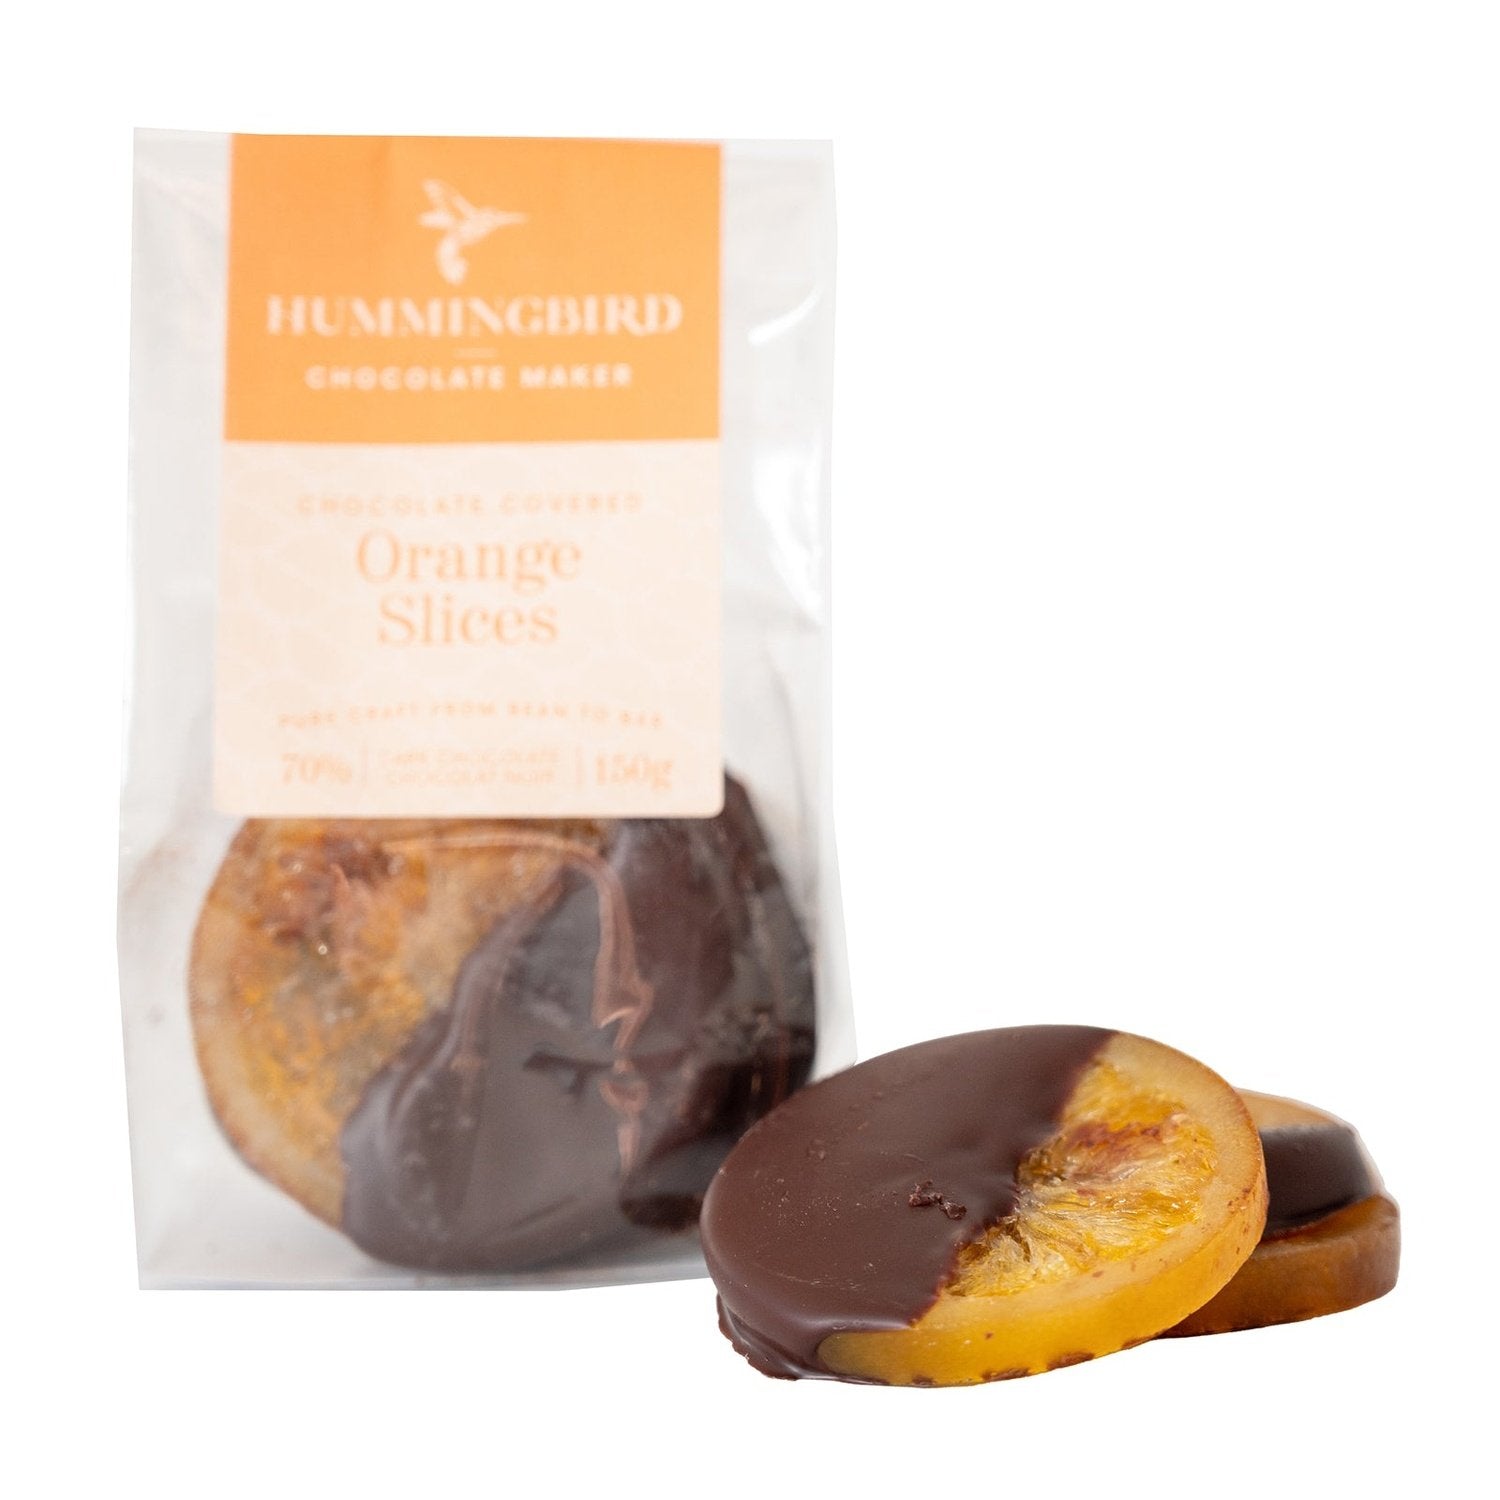 Chocolate covered candied orange slices stacked beside wrapped package from Hummingbird Chocolate Maker